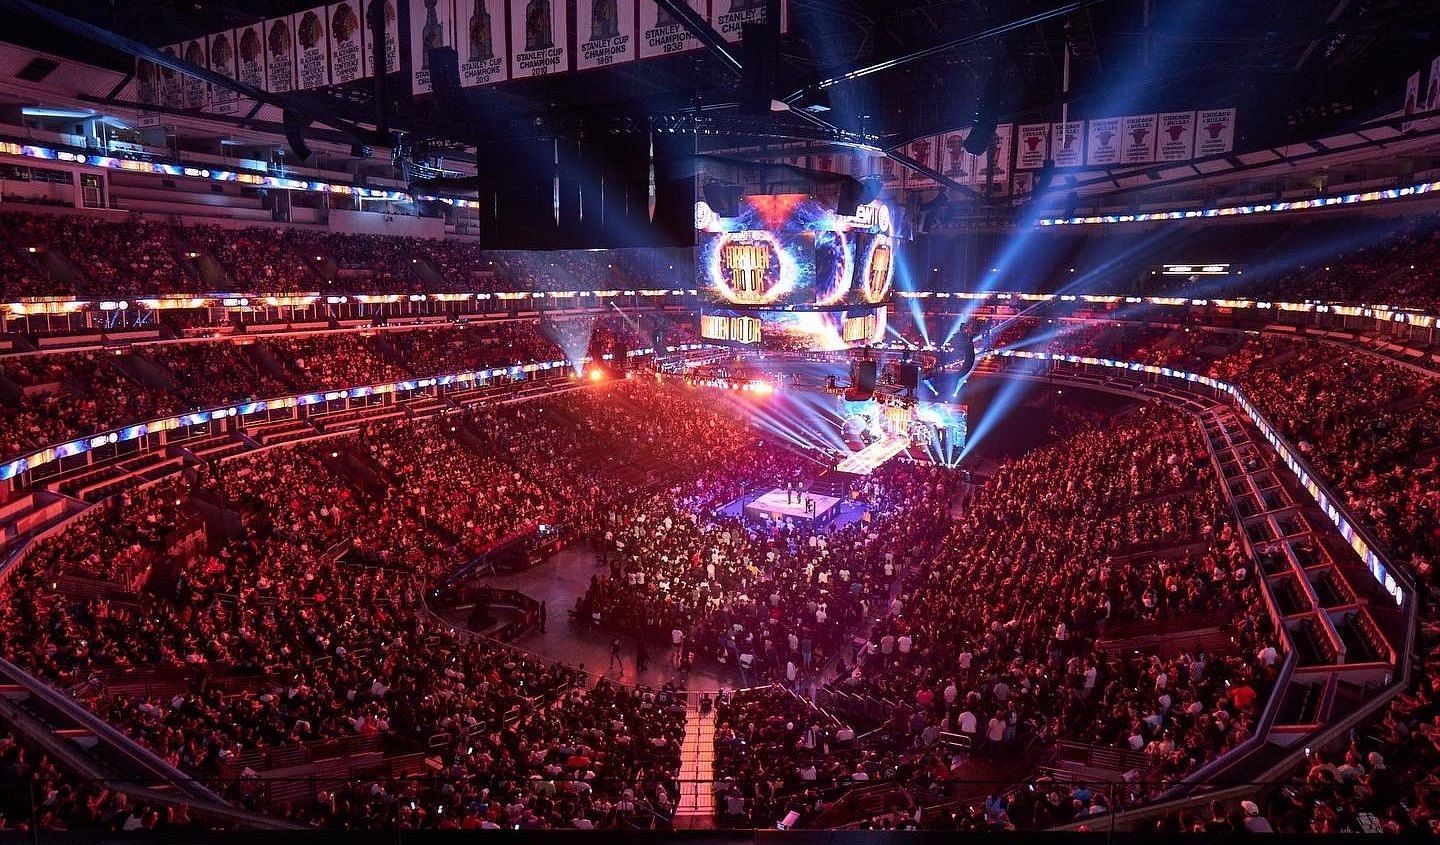 AEW x NJPW: Forbidden Door took place in the sold out United Center in Chicago